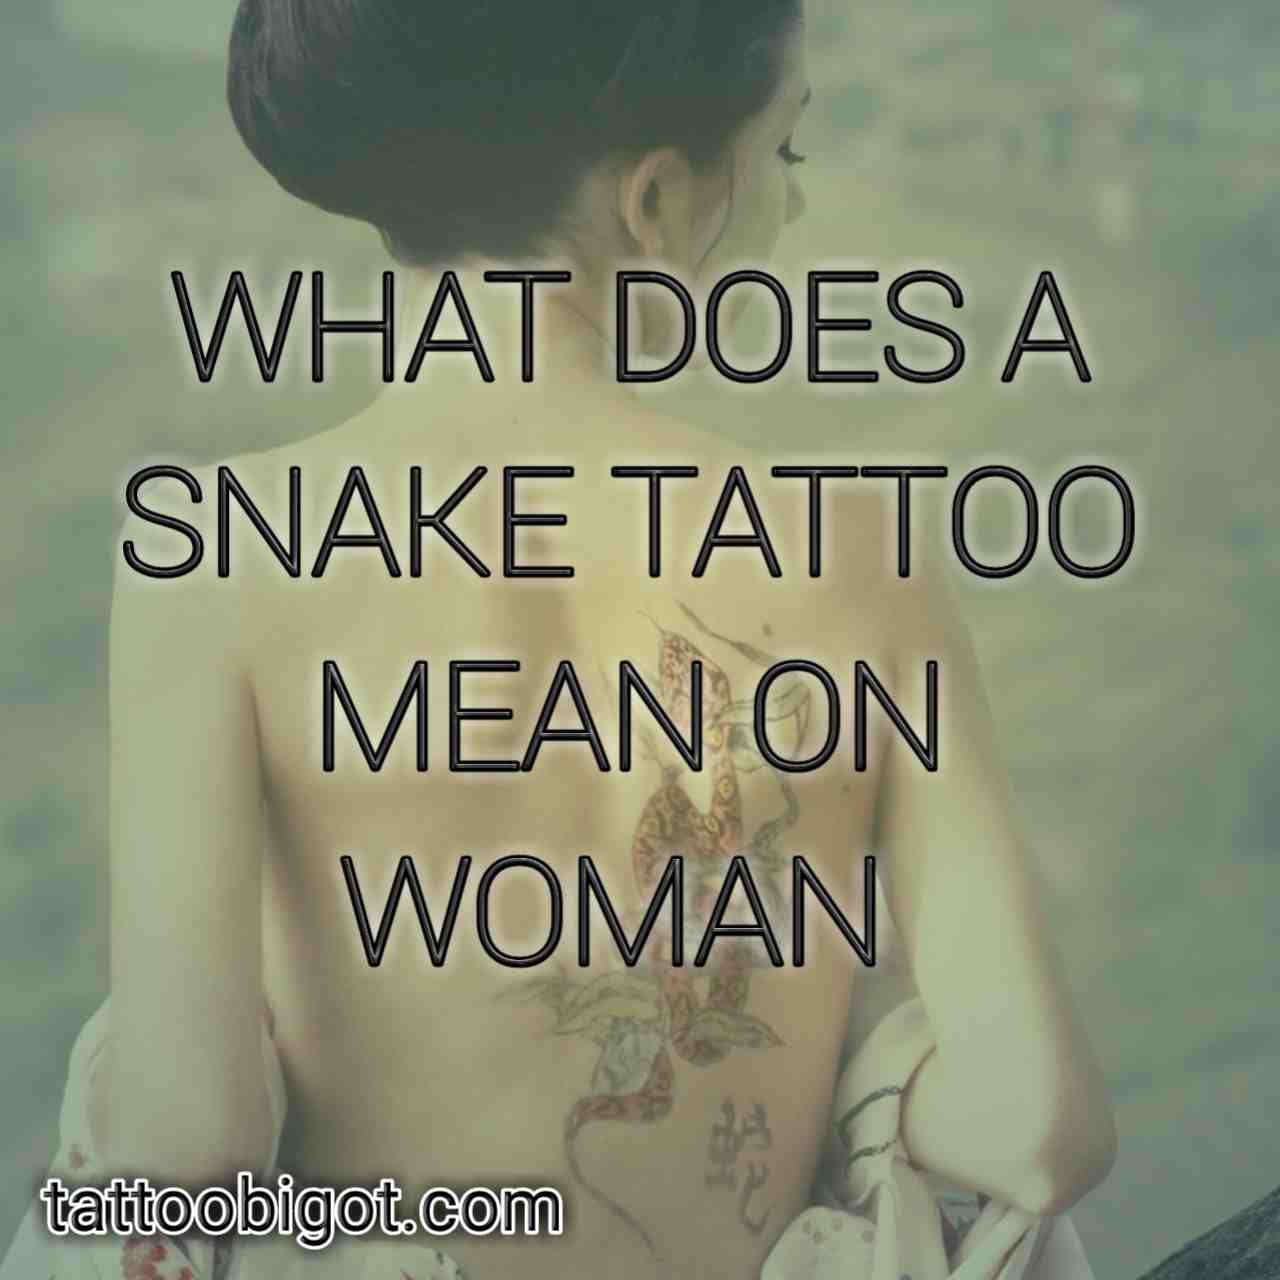 What does a snake tattoo mean on woman